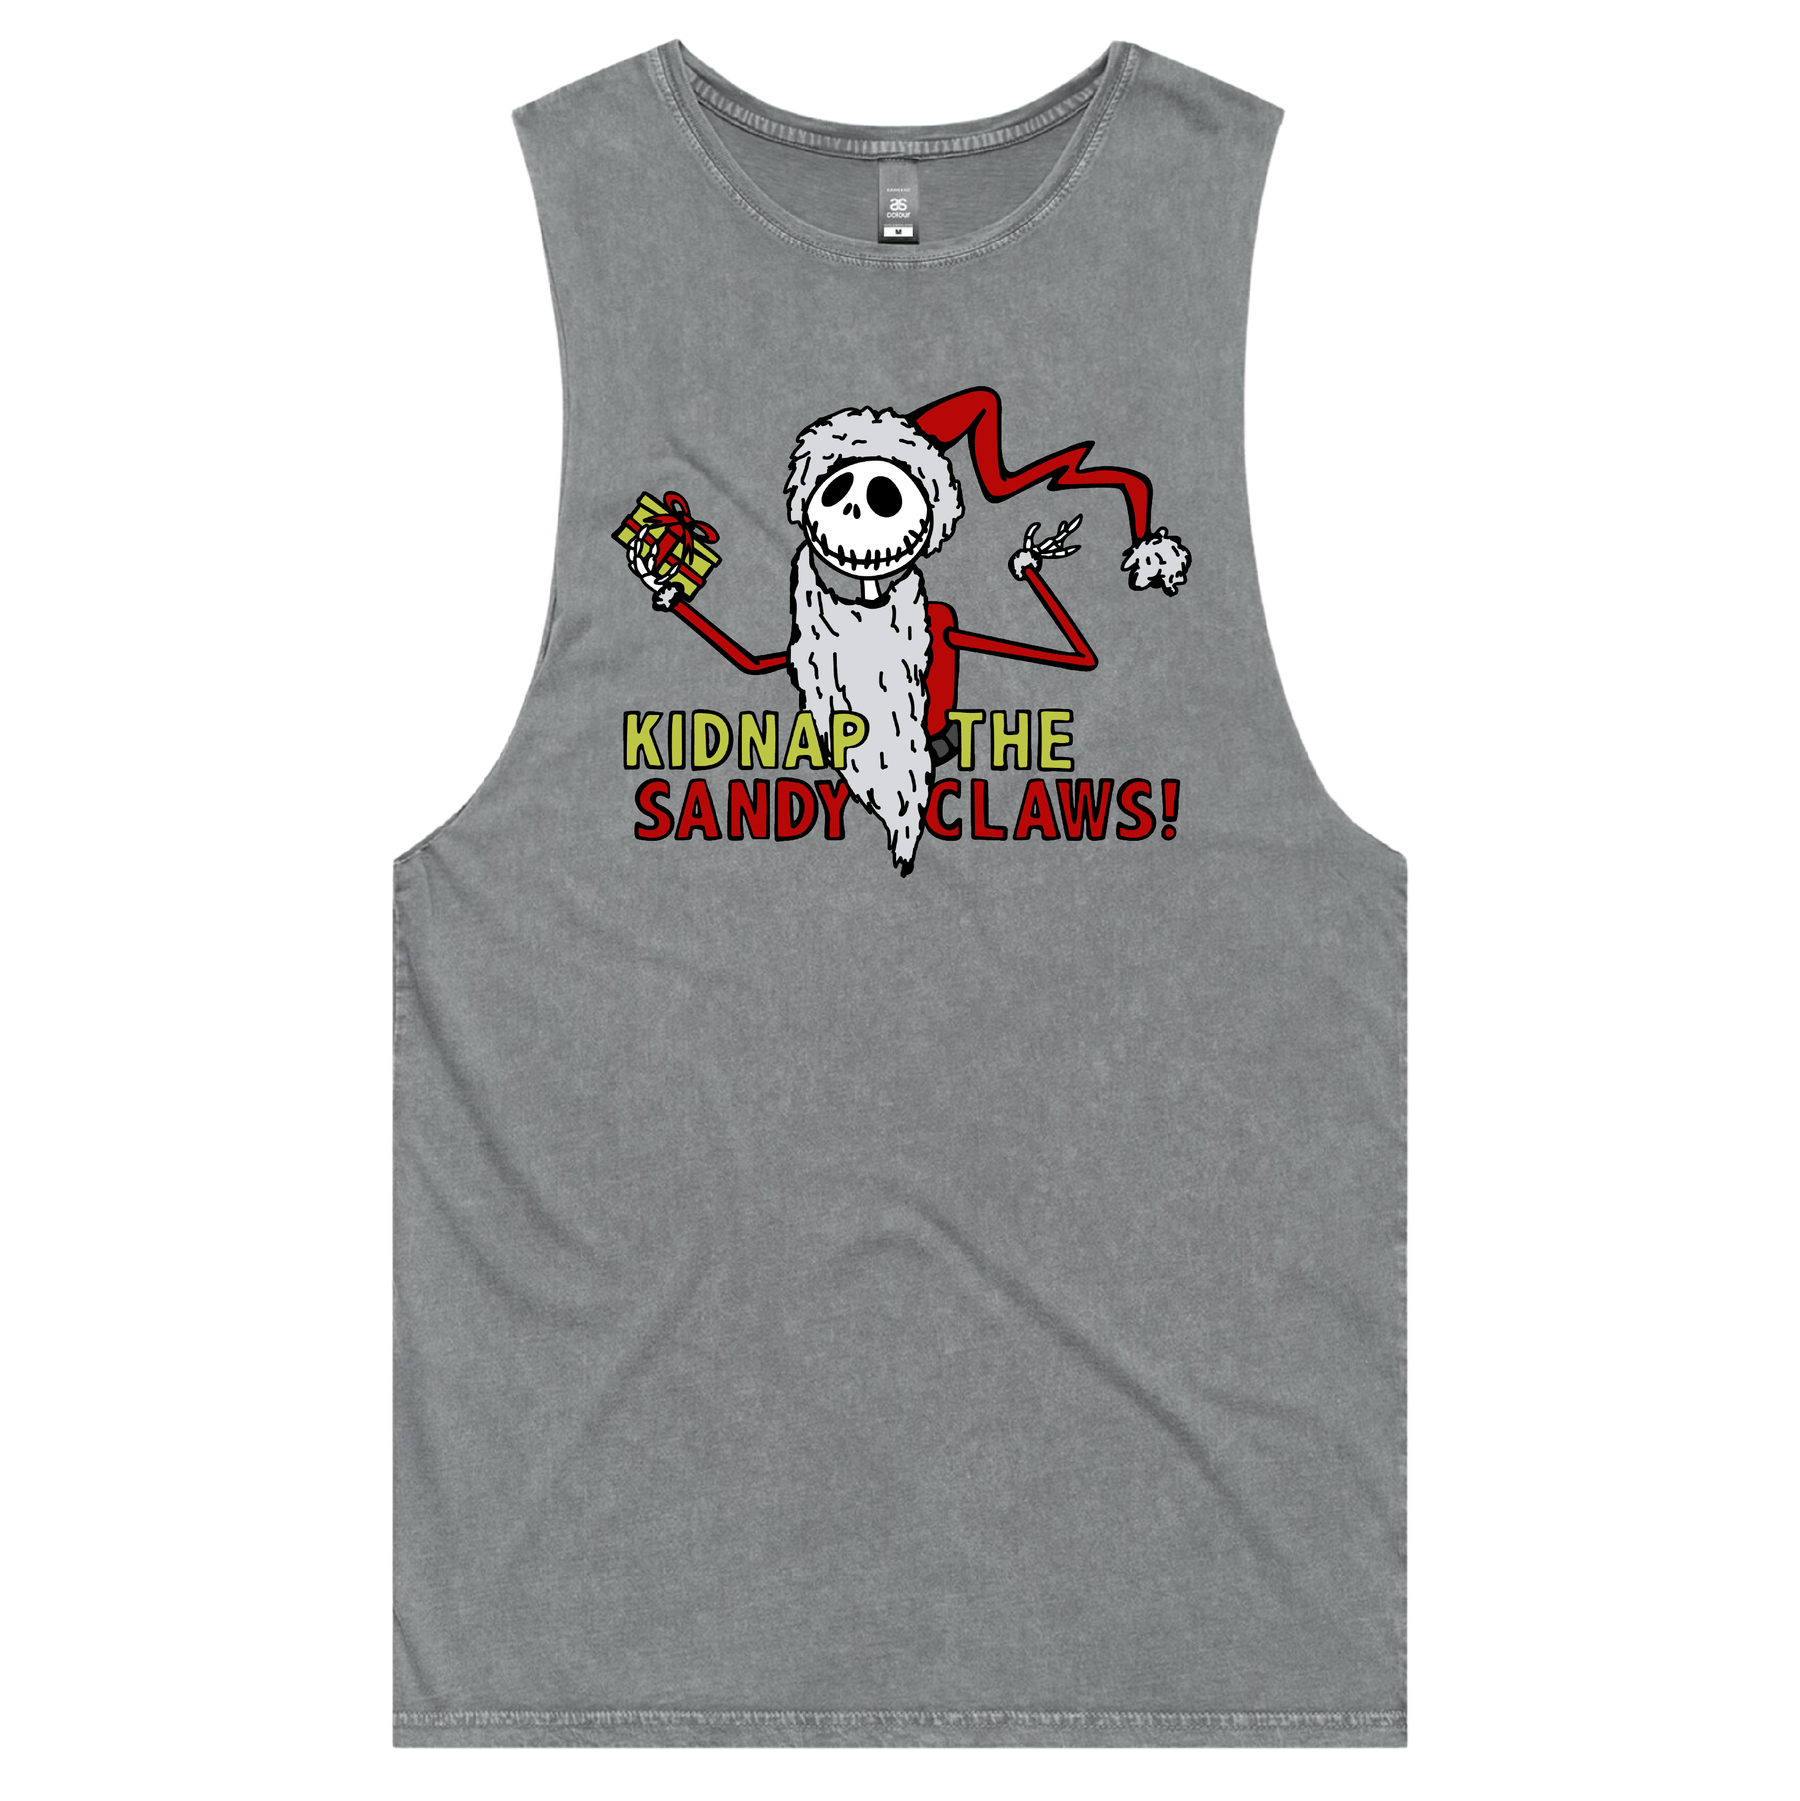 Kidnap the Sandy Claws 💀🎅 – Tank